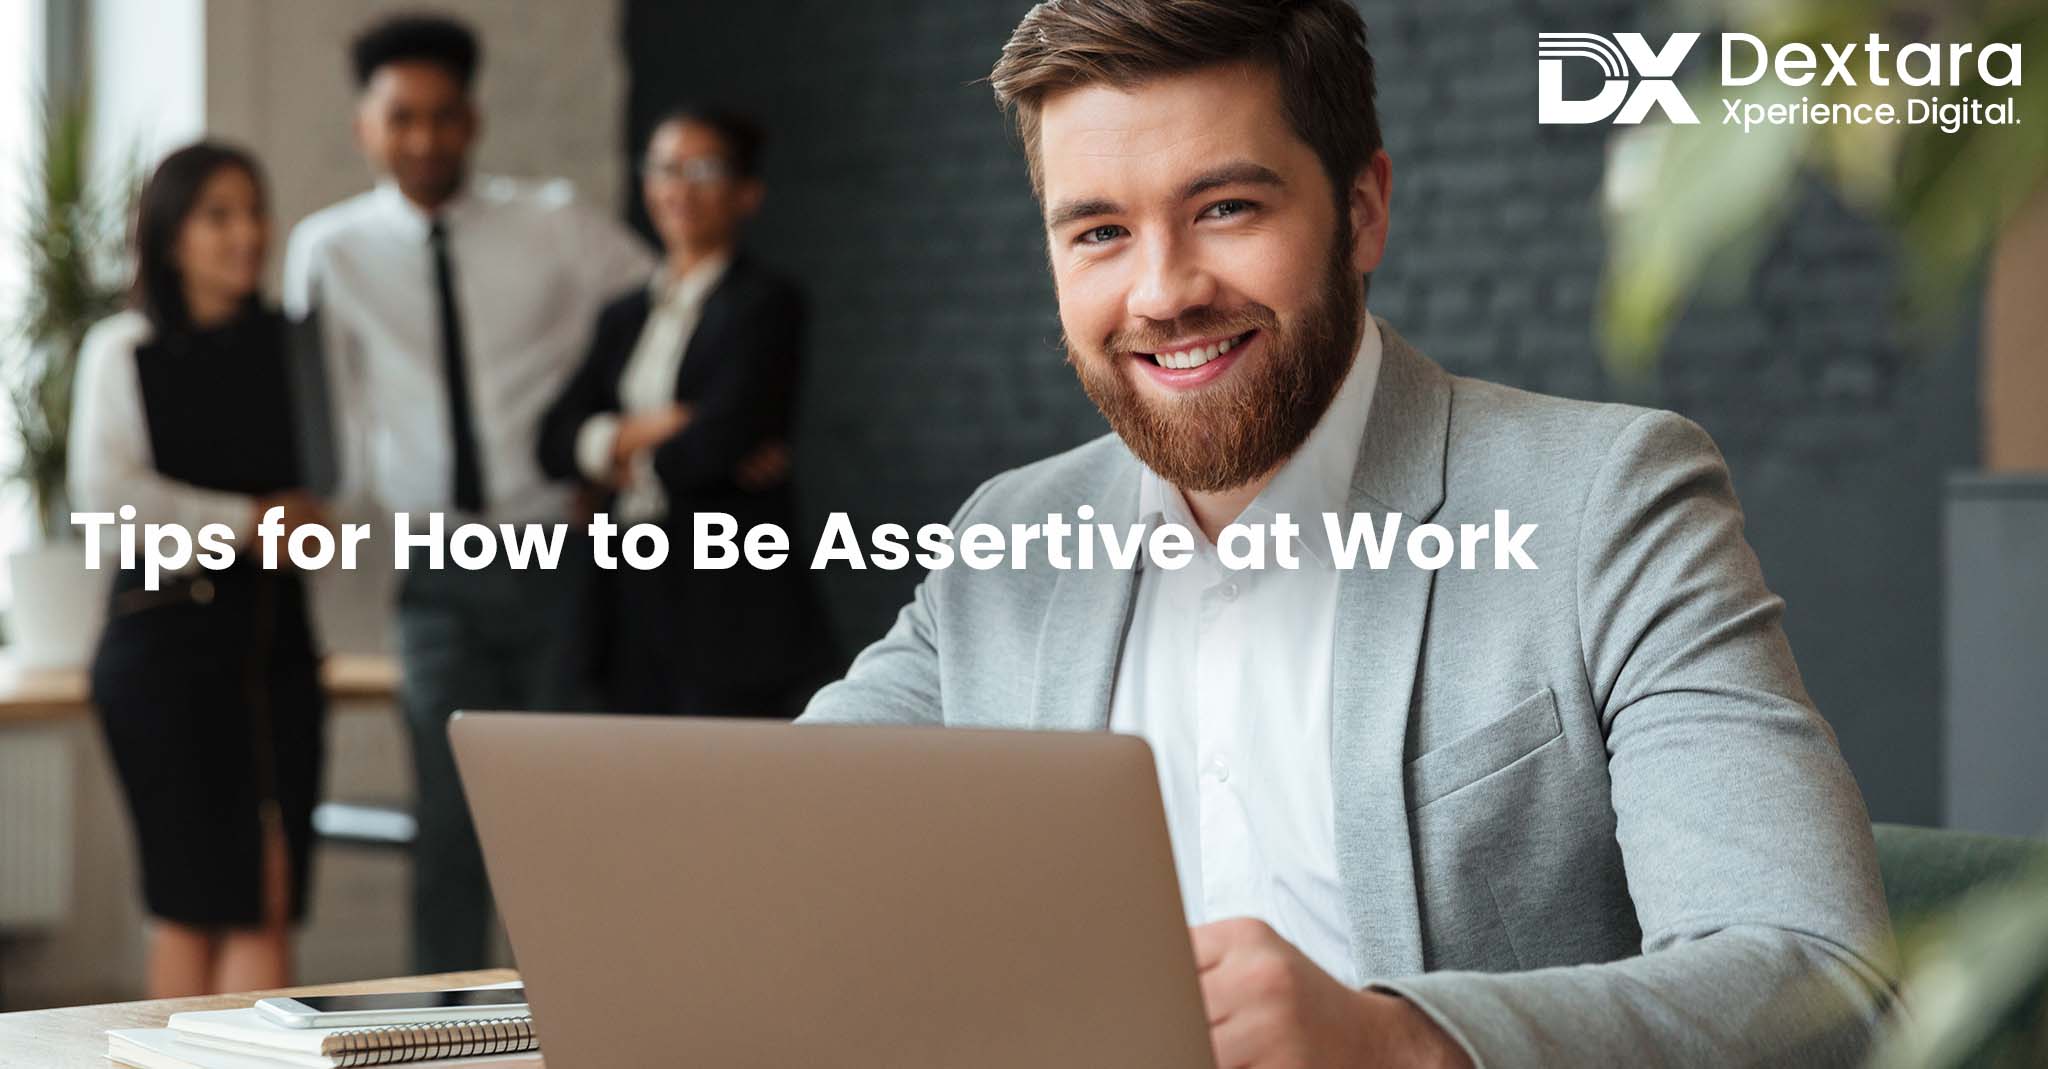 know these top 6 ways to be assertive at work